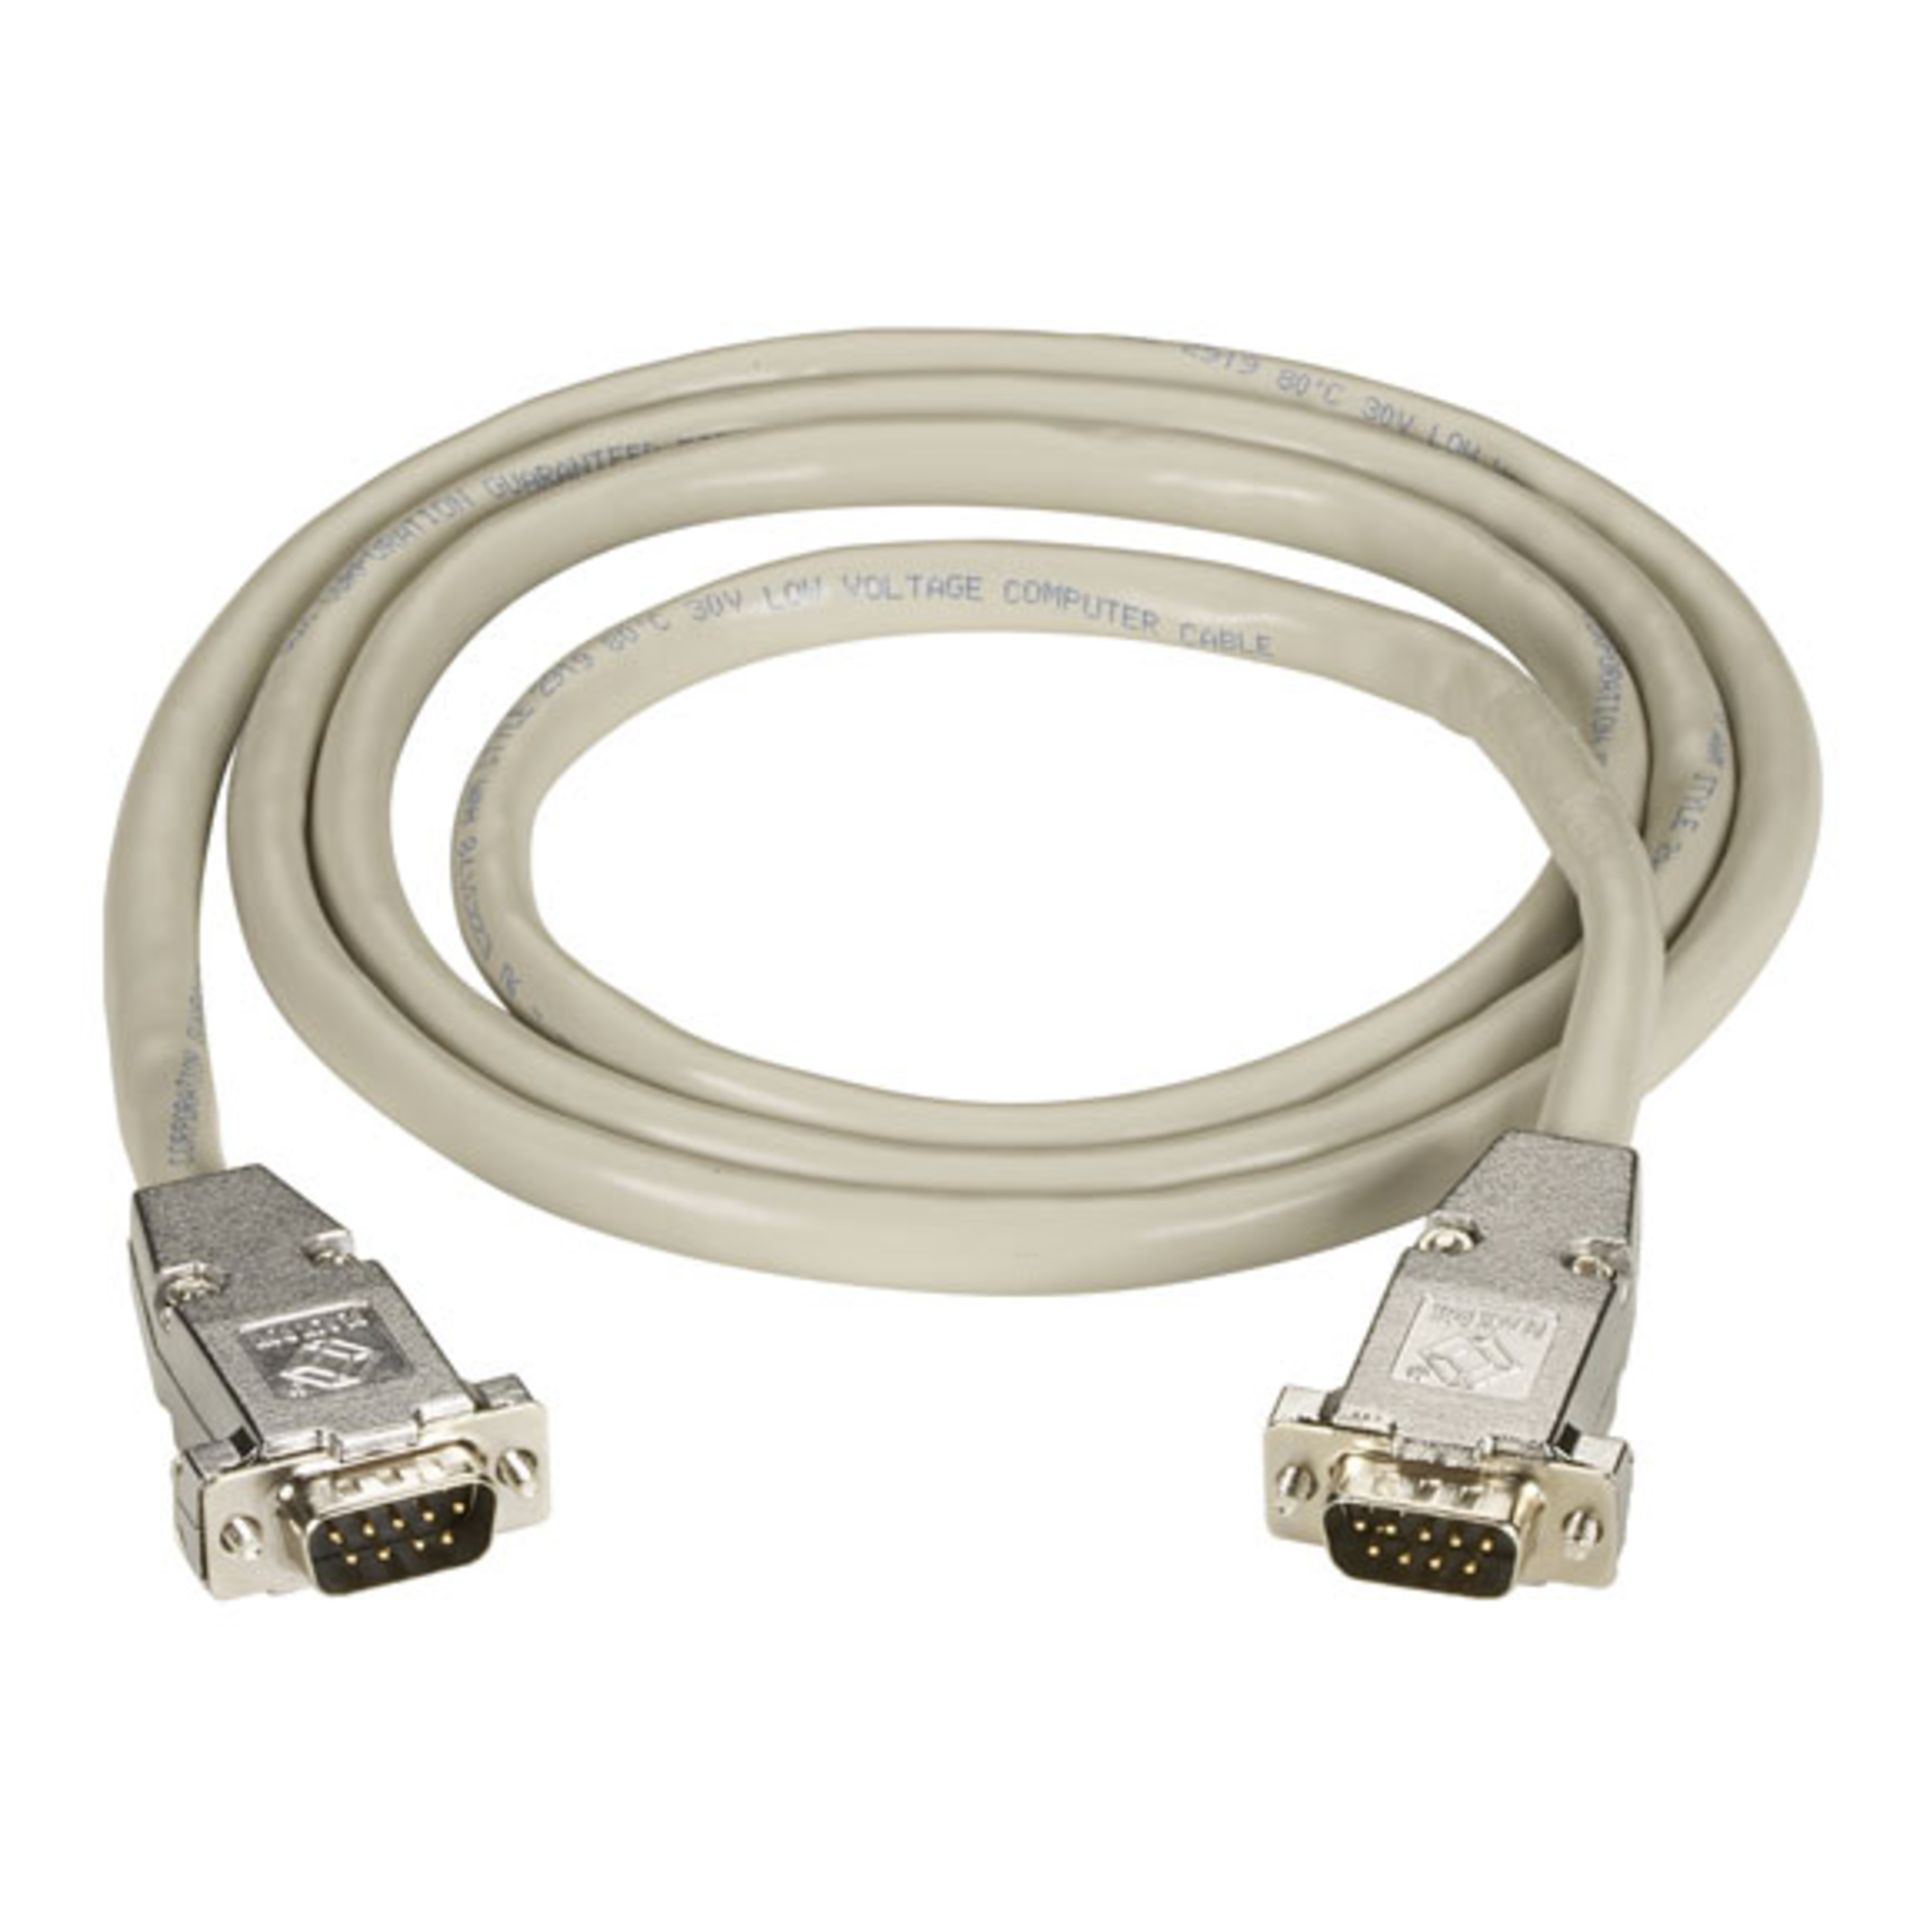 DB9 EMI/RFI Cable with Black Jacket, M-F, M-M, 5FT, 10FT - Image 3 of 3